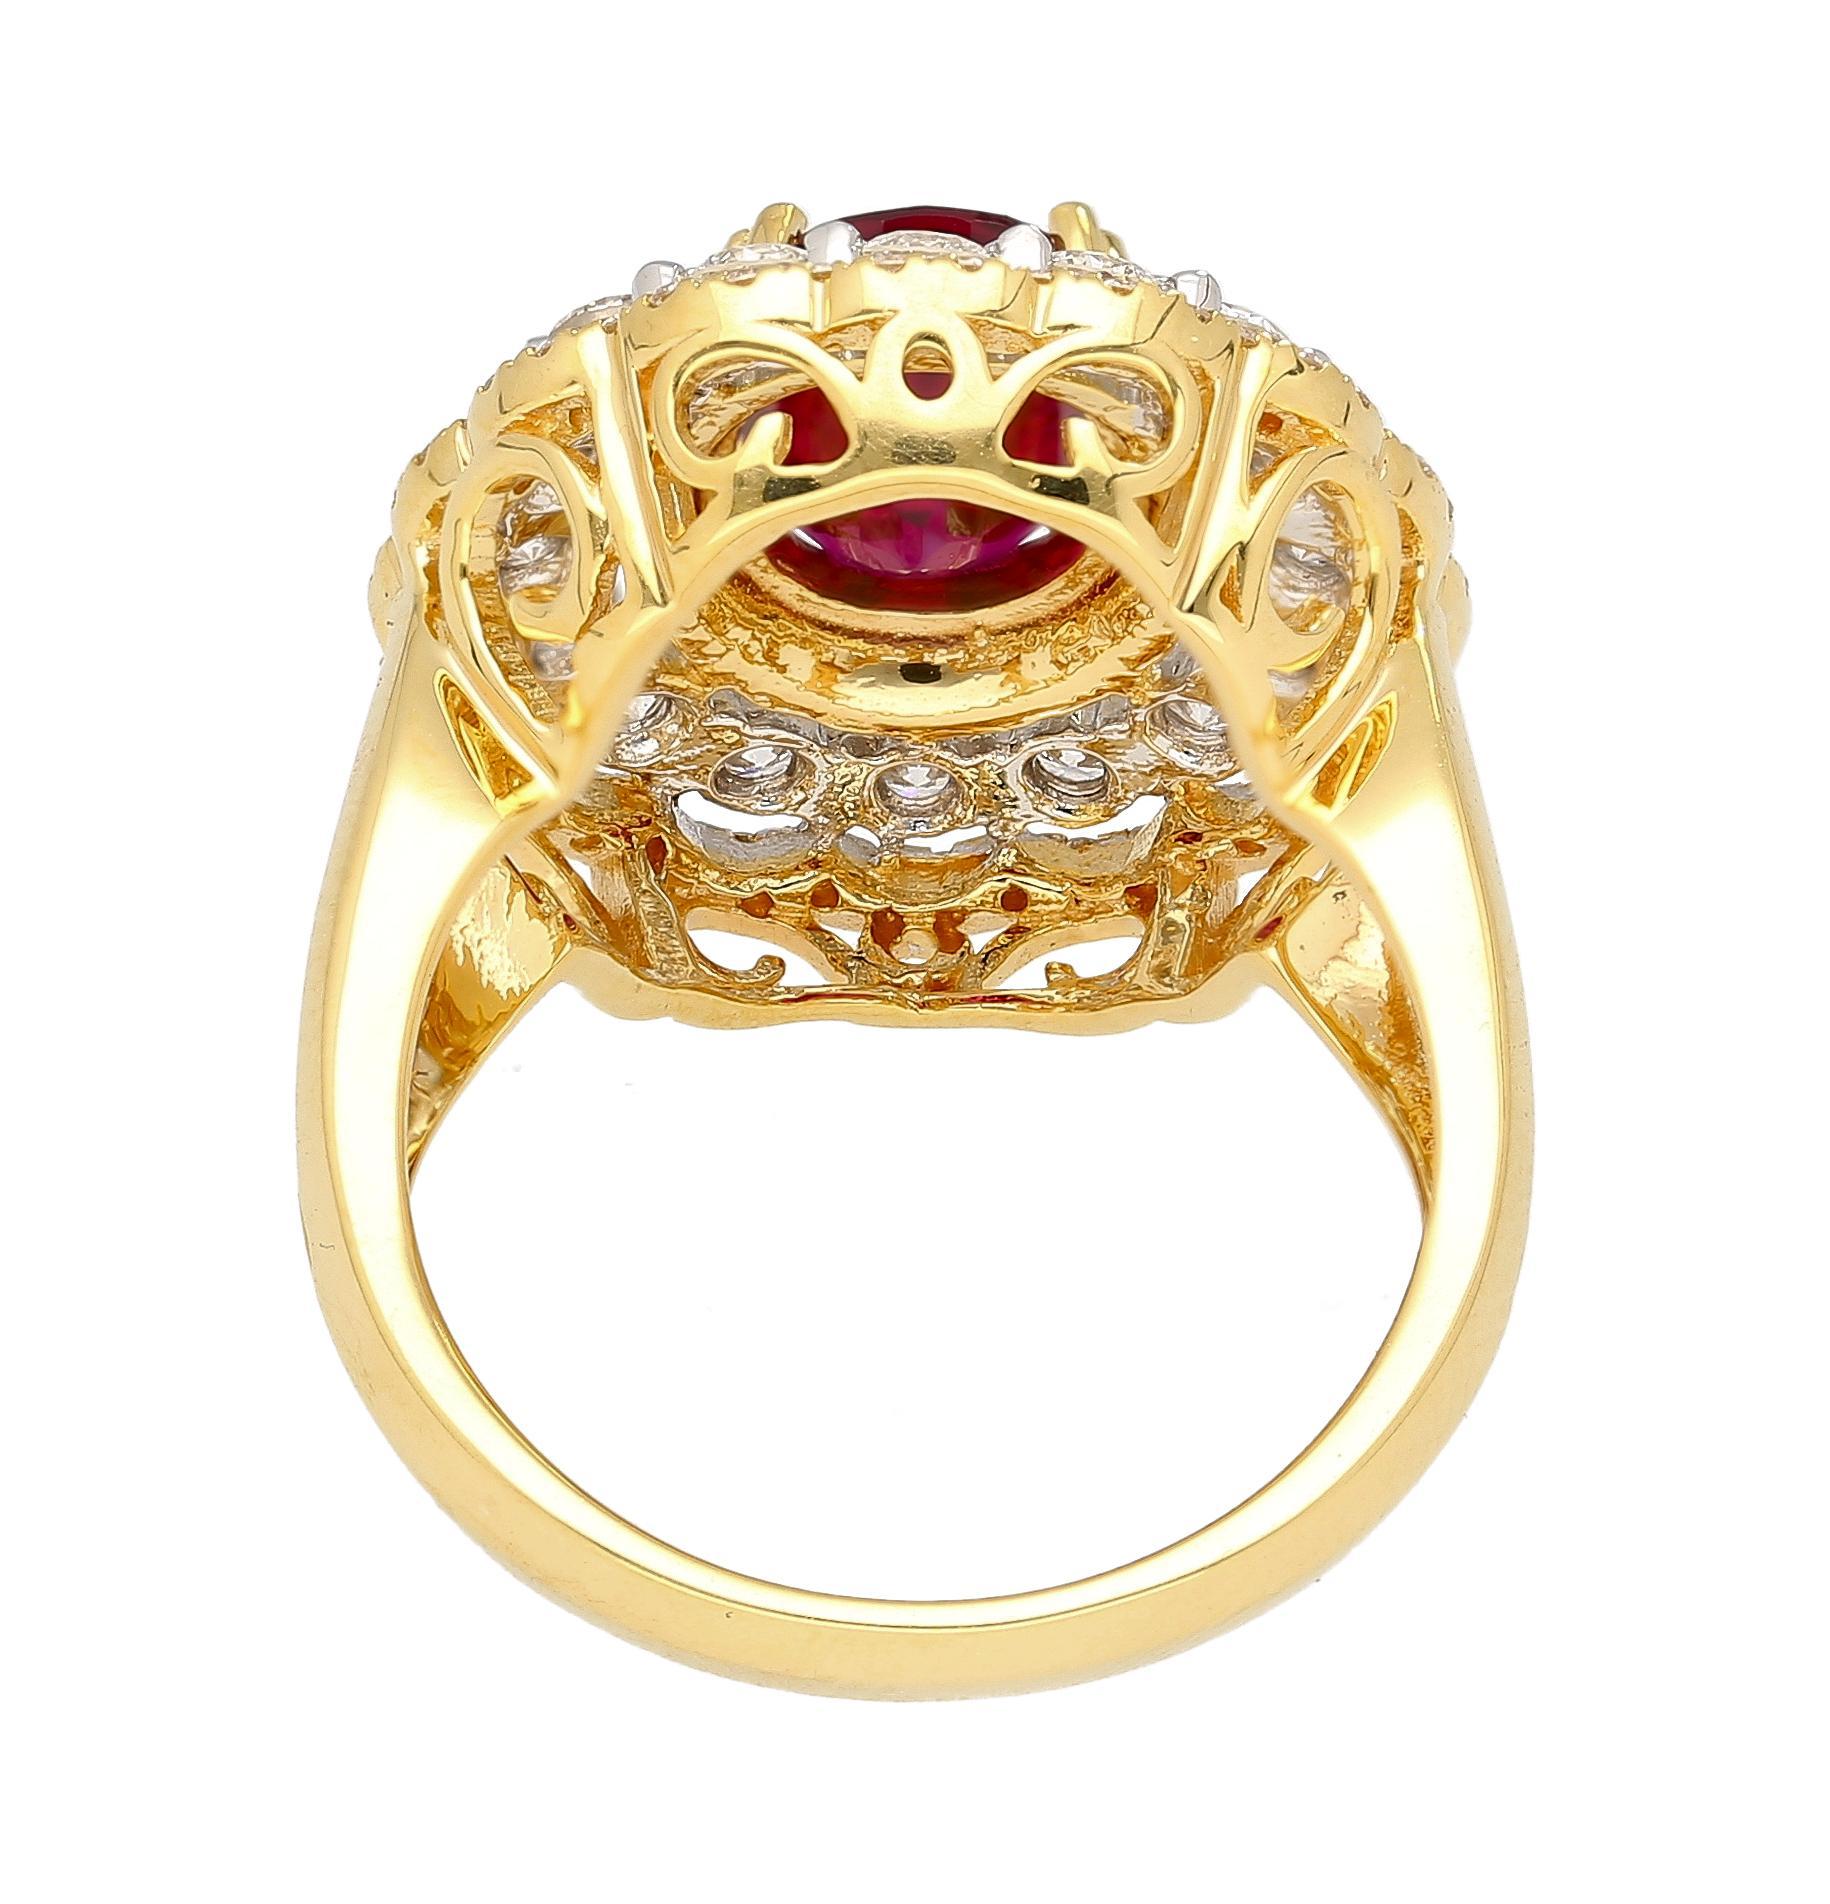 GRS Certified 2.58 Carat Oval Cut Thai Ruby with Diamond Three Rings Of Round Cut Diamond Halo in Two Tone 18k Gold. Retro inspired design vintage ring setting. 

16 round-cut natural diamonds totaling 0.91 carats and 70 round-cut natural diamonds